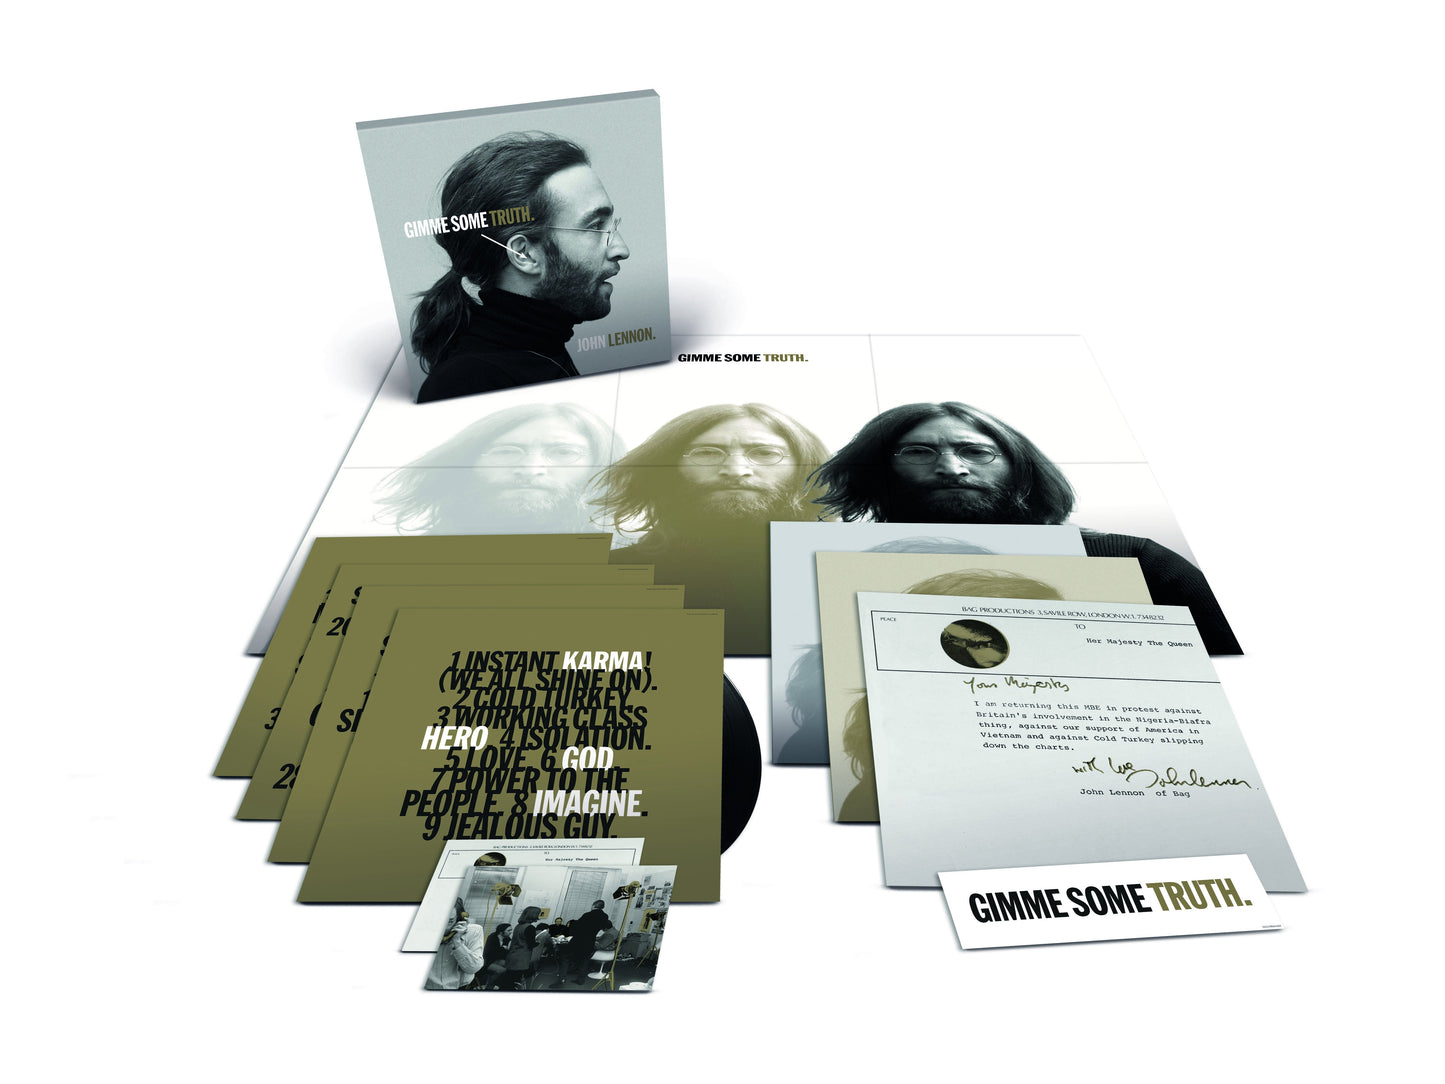 GIMME SOME TRUTH. [4 LP Box Set]